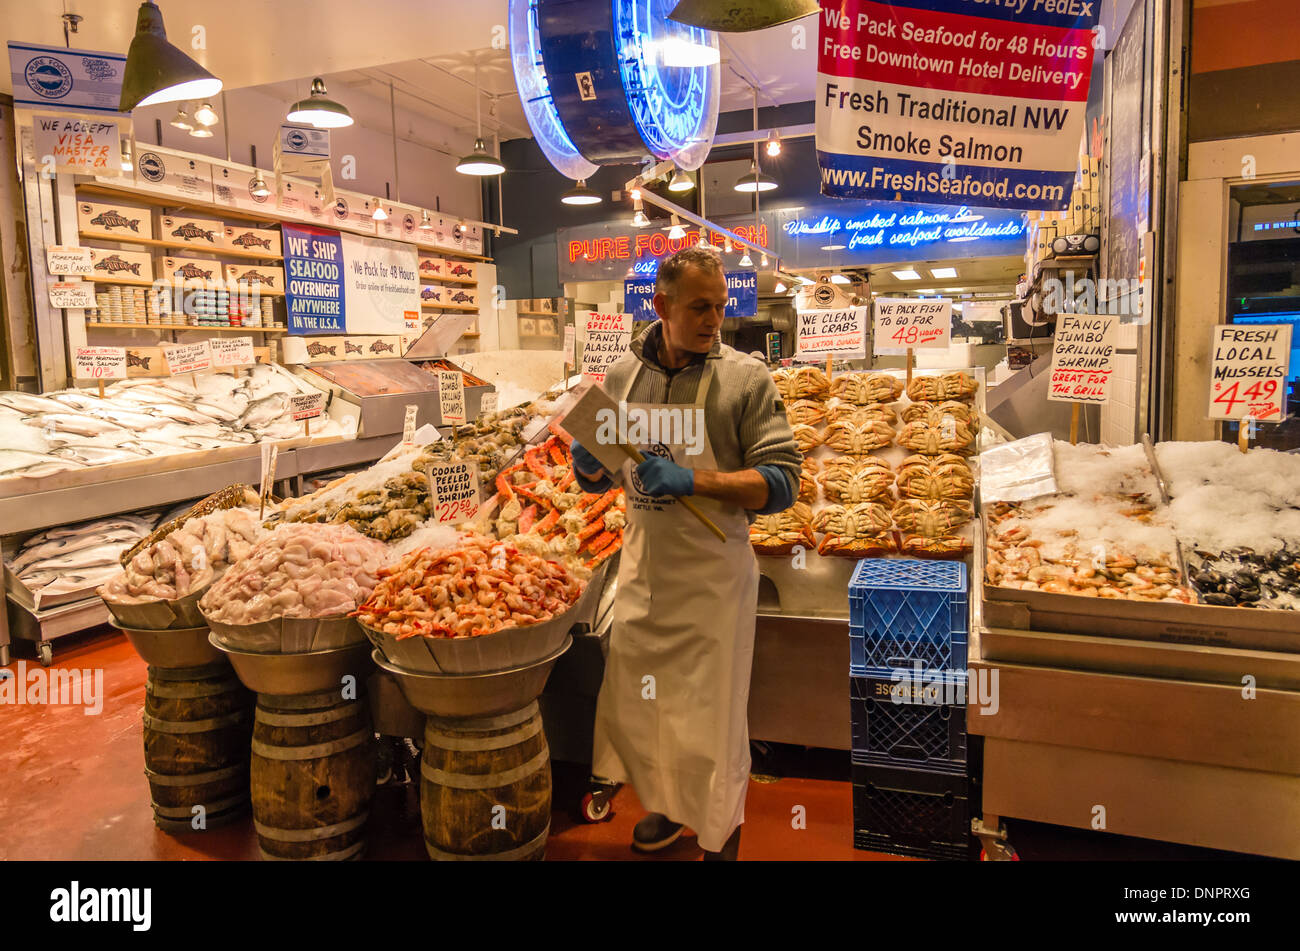 Fish monger setting up a display in a market stall Pike Place Market Seattle, Washington, USA Stock Photo